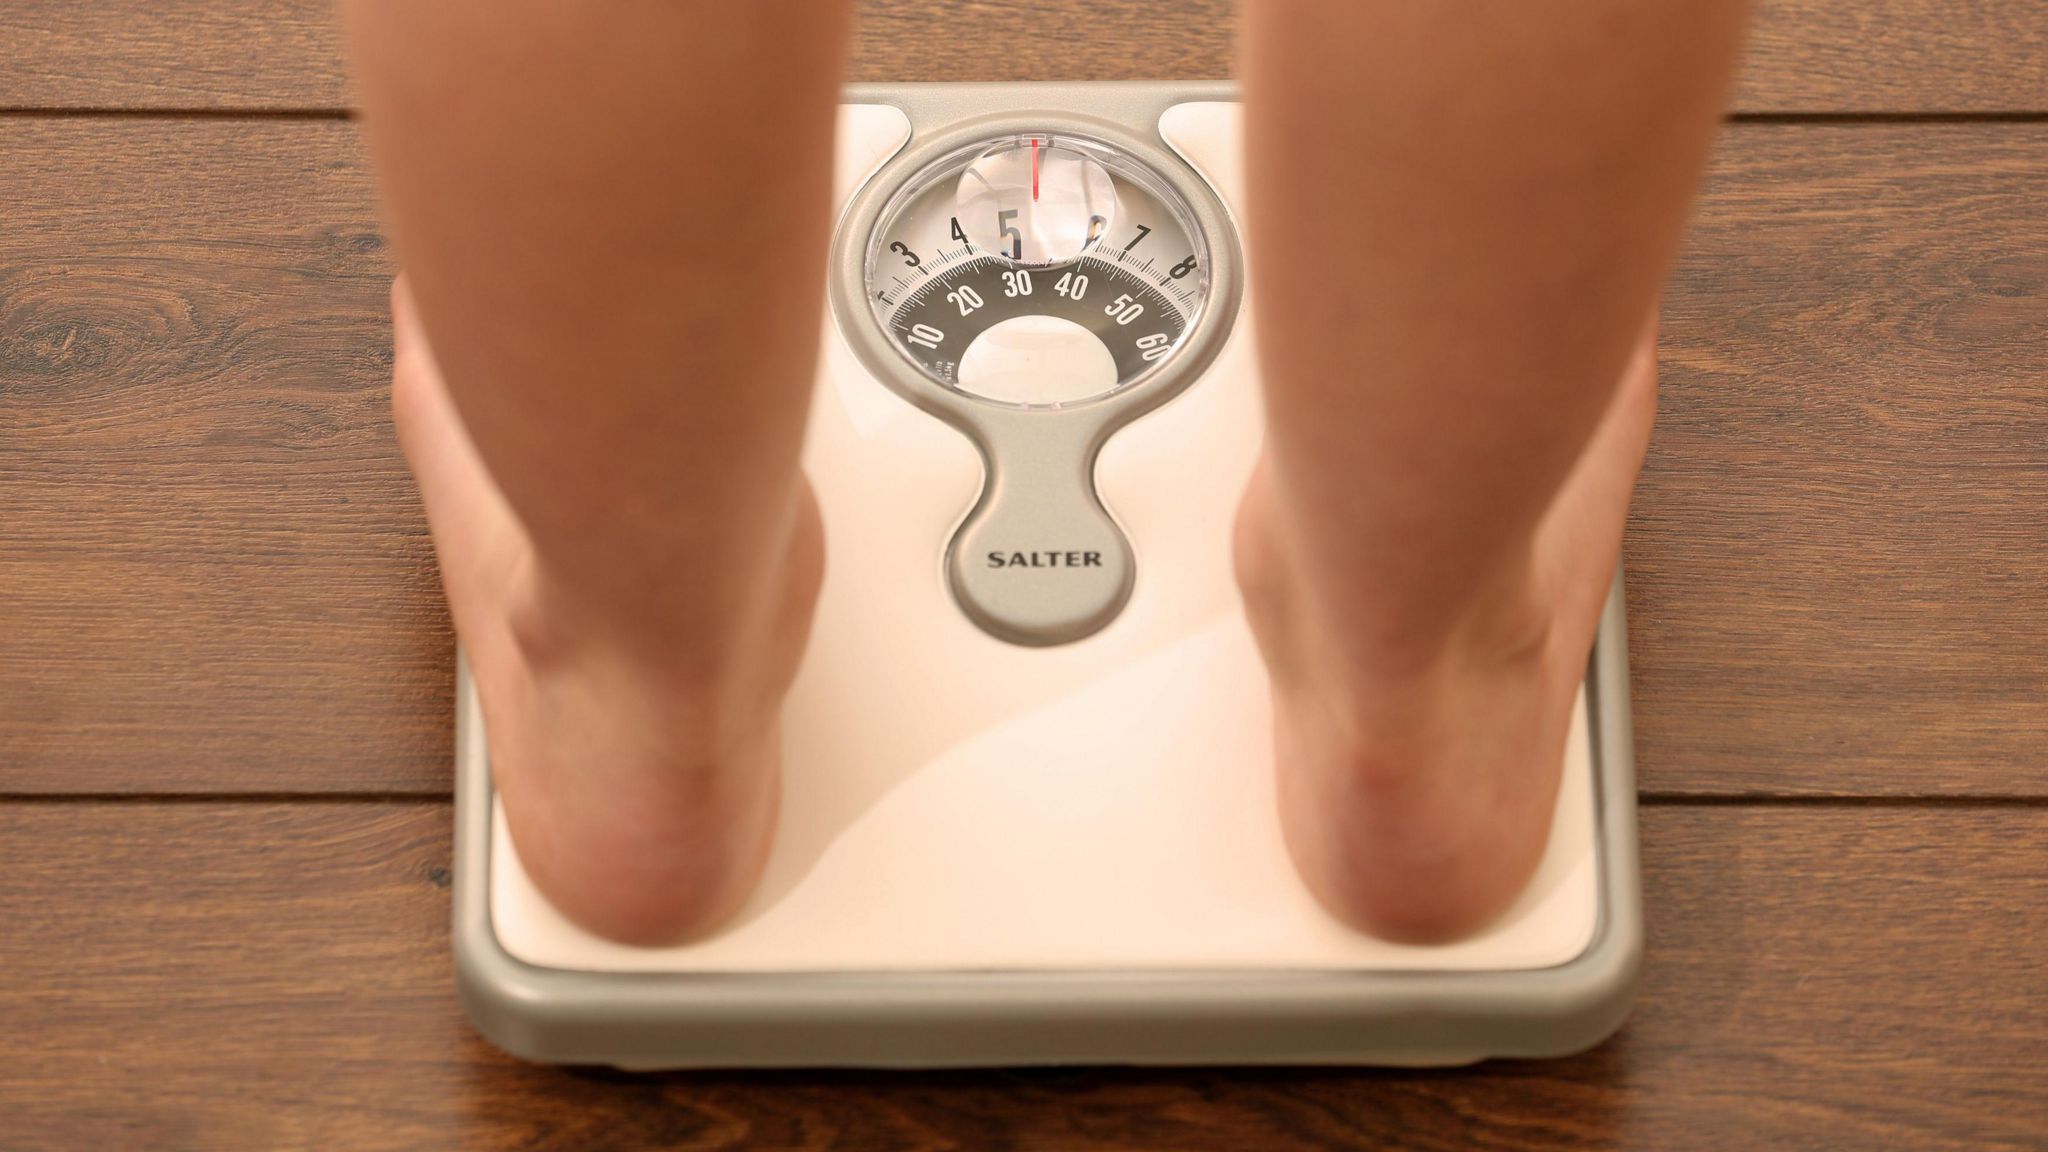 A person on weighing scales